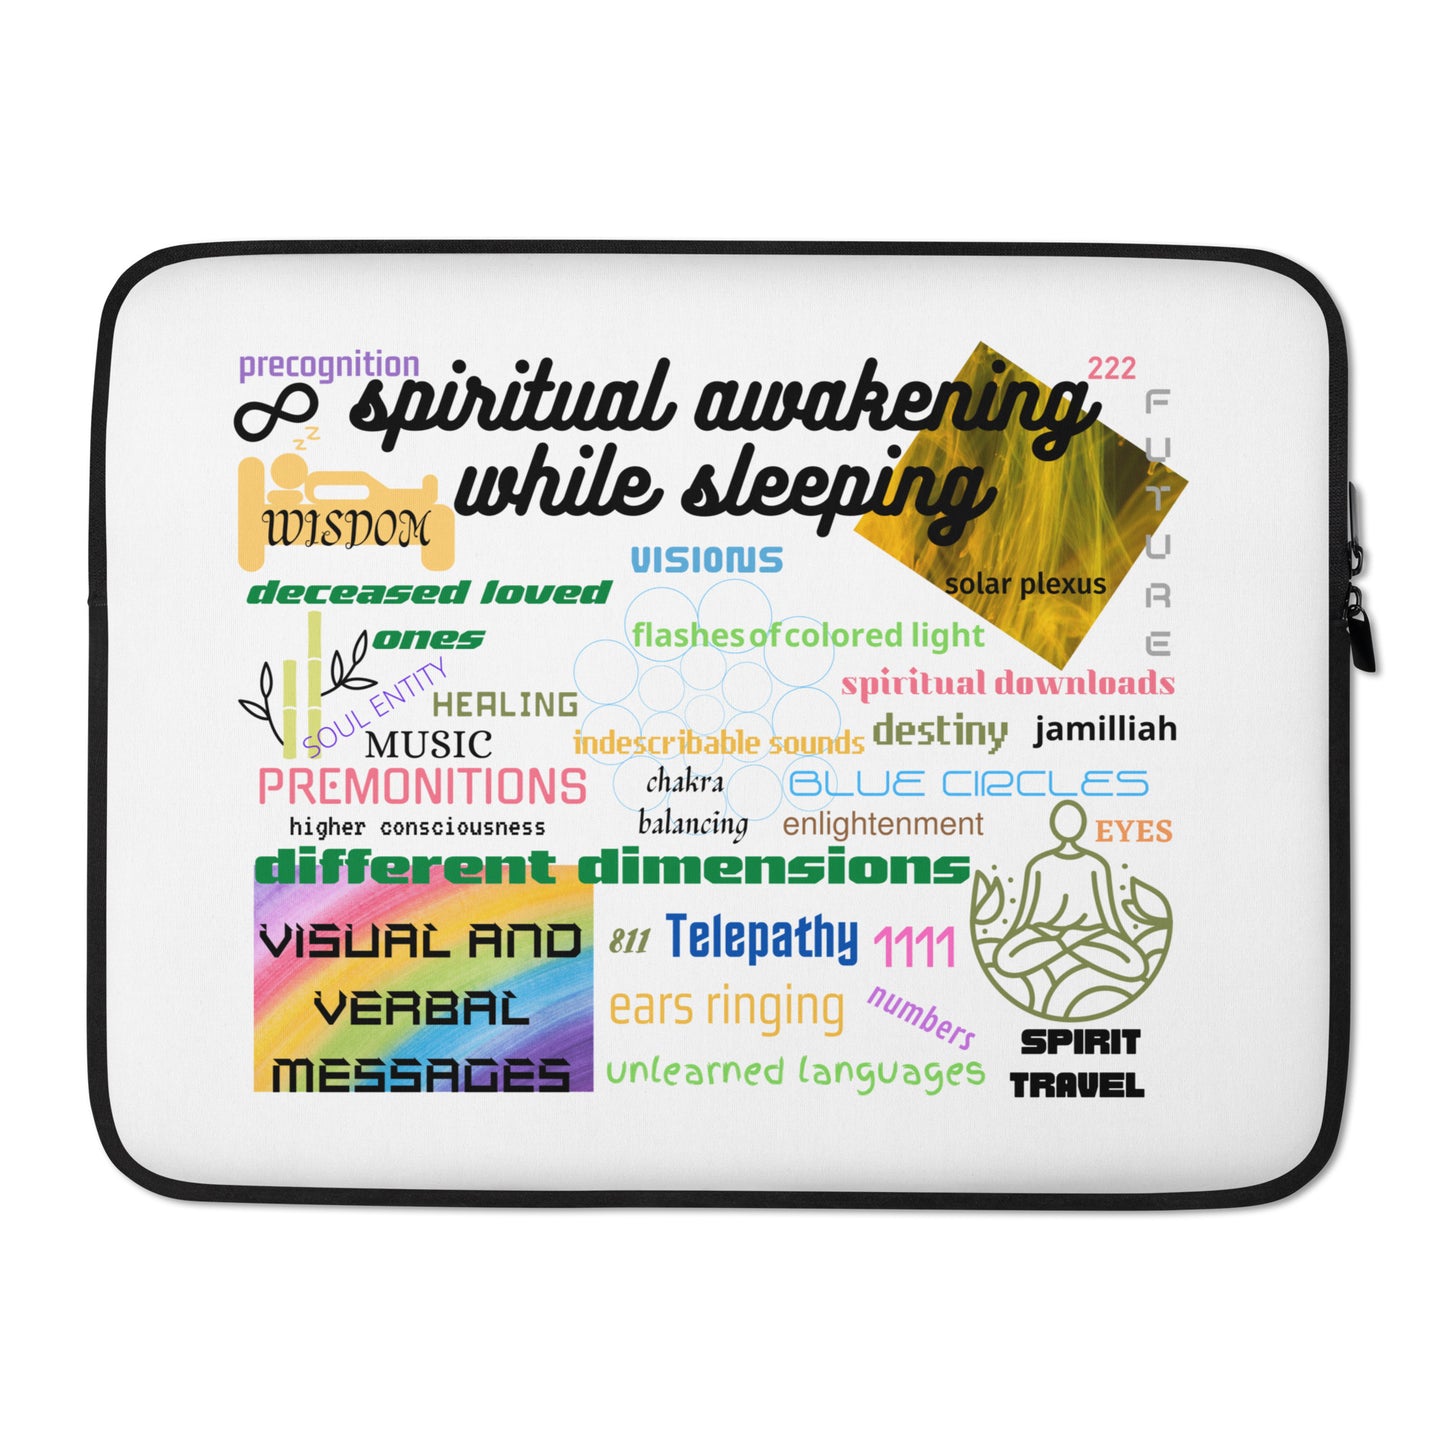 Lightweight laptop sleeve, 15 inches front. Colorful with black back and faux fur interior lining. Collage with images and words of premonitions, person in bed experiencing spirit travel, higher consciousness, different dimensions, spiritual downloads, future, infinity symbol, wisdom, telepathy, music, healing, soul entity, destiny, balanced chakras, meditation, sacred geometry circles, angel numbers, precognition, and spiritual awakening. JAMILLIAH'S WISDOM IS TIMELESS SHOP - wisdomistimeless.com.